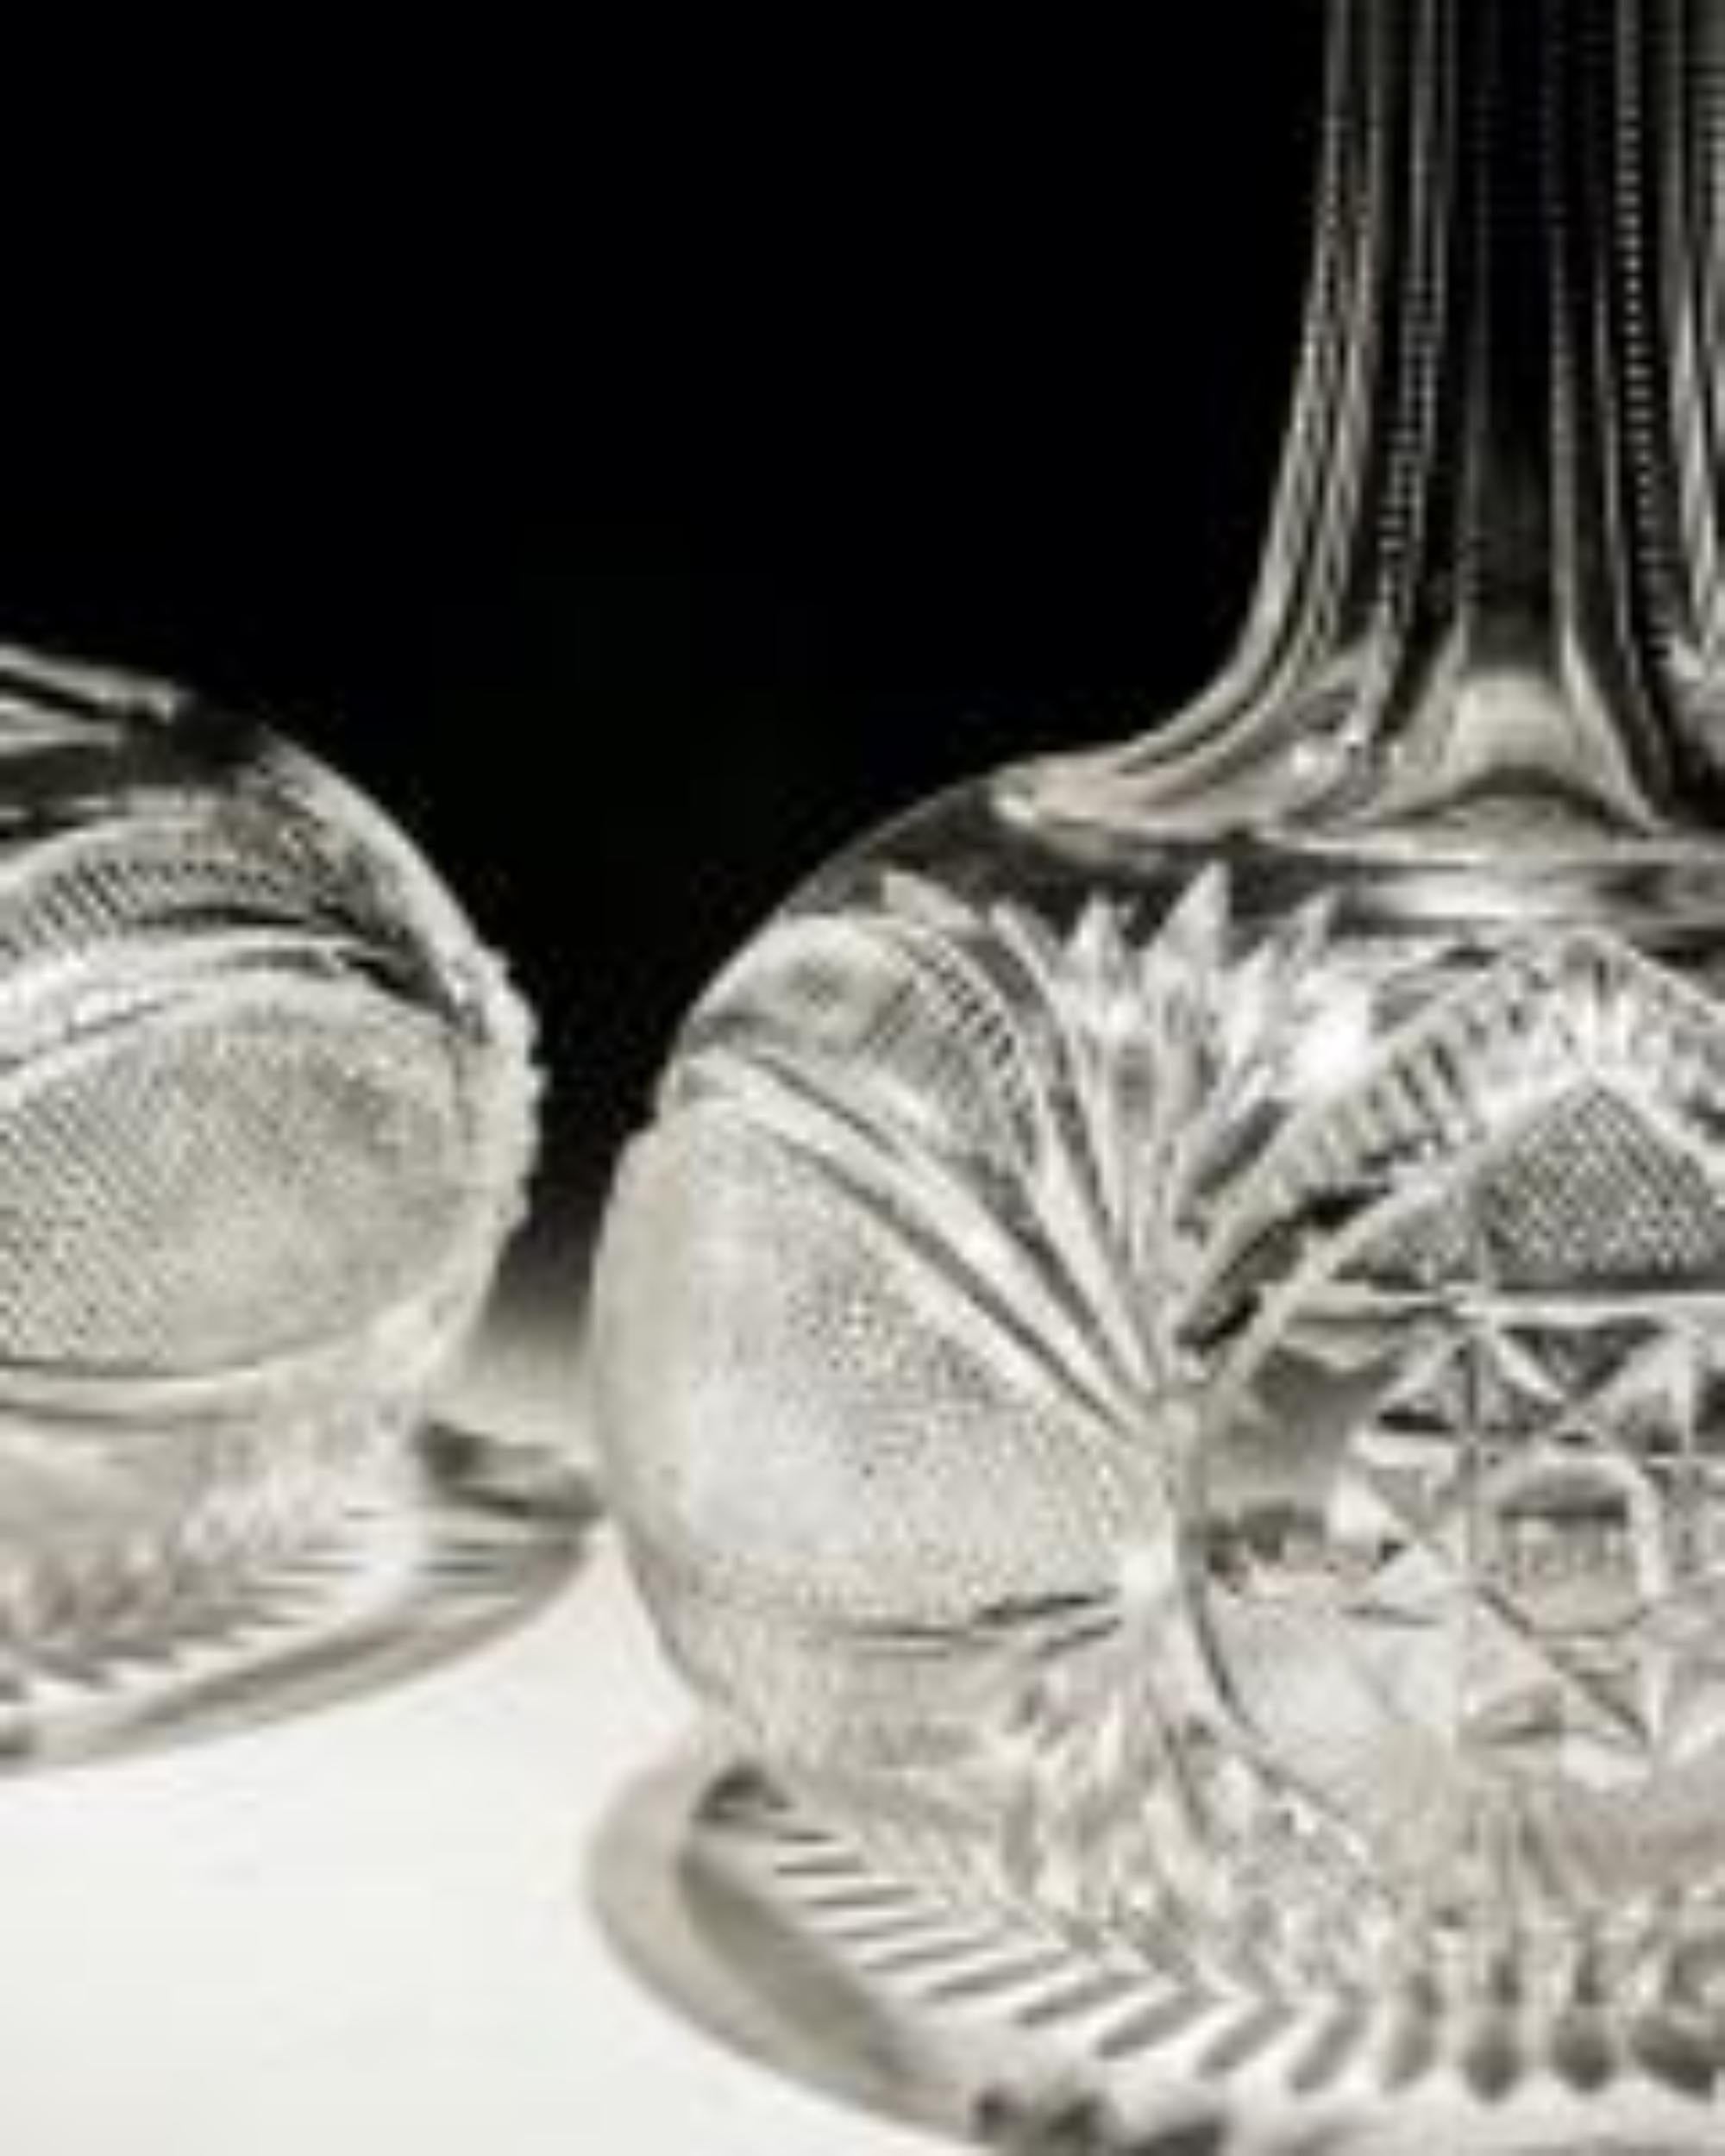 Shaft and Globe Victorian Decanters In Good Condition For Sale In Steyning, West sussex